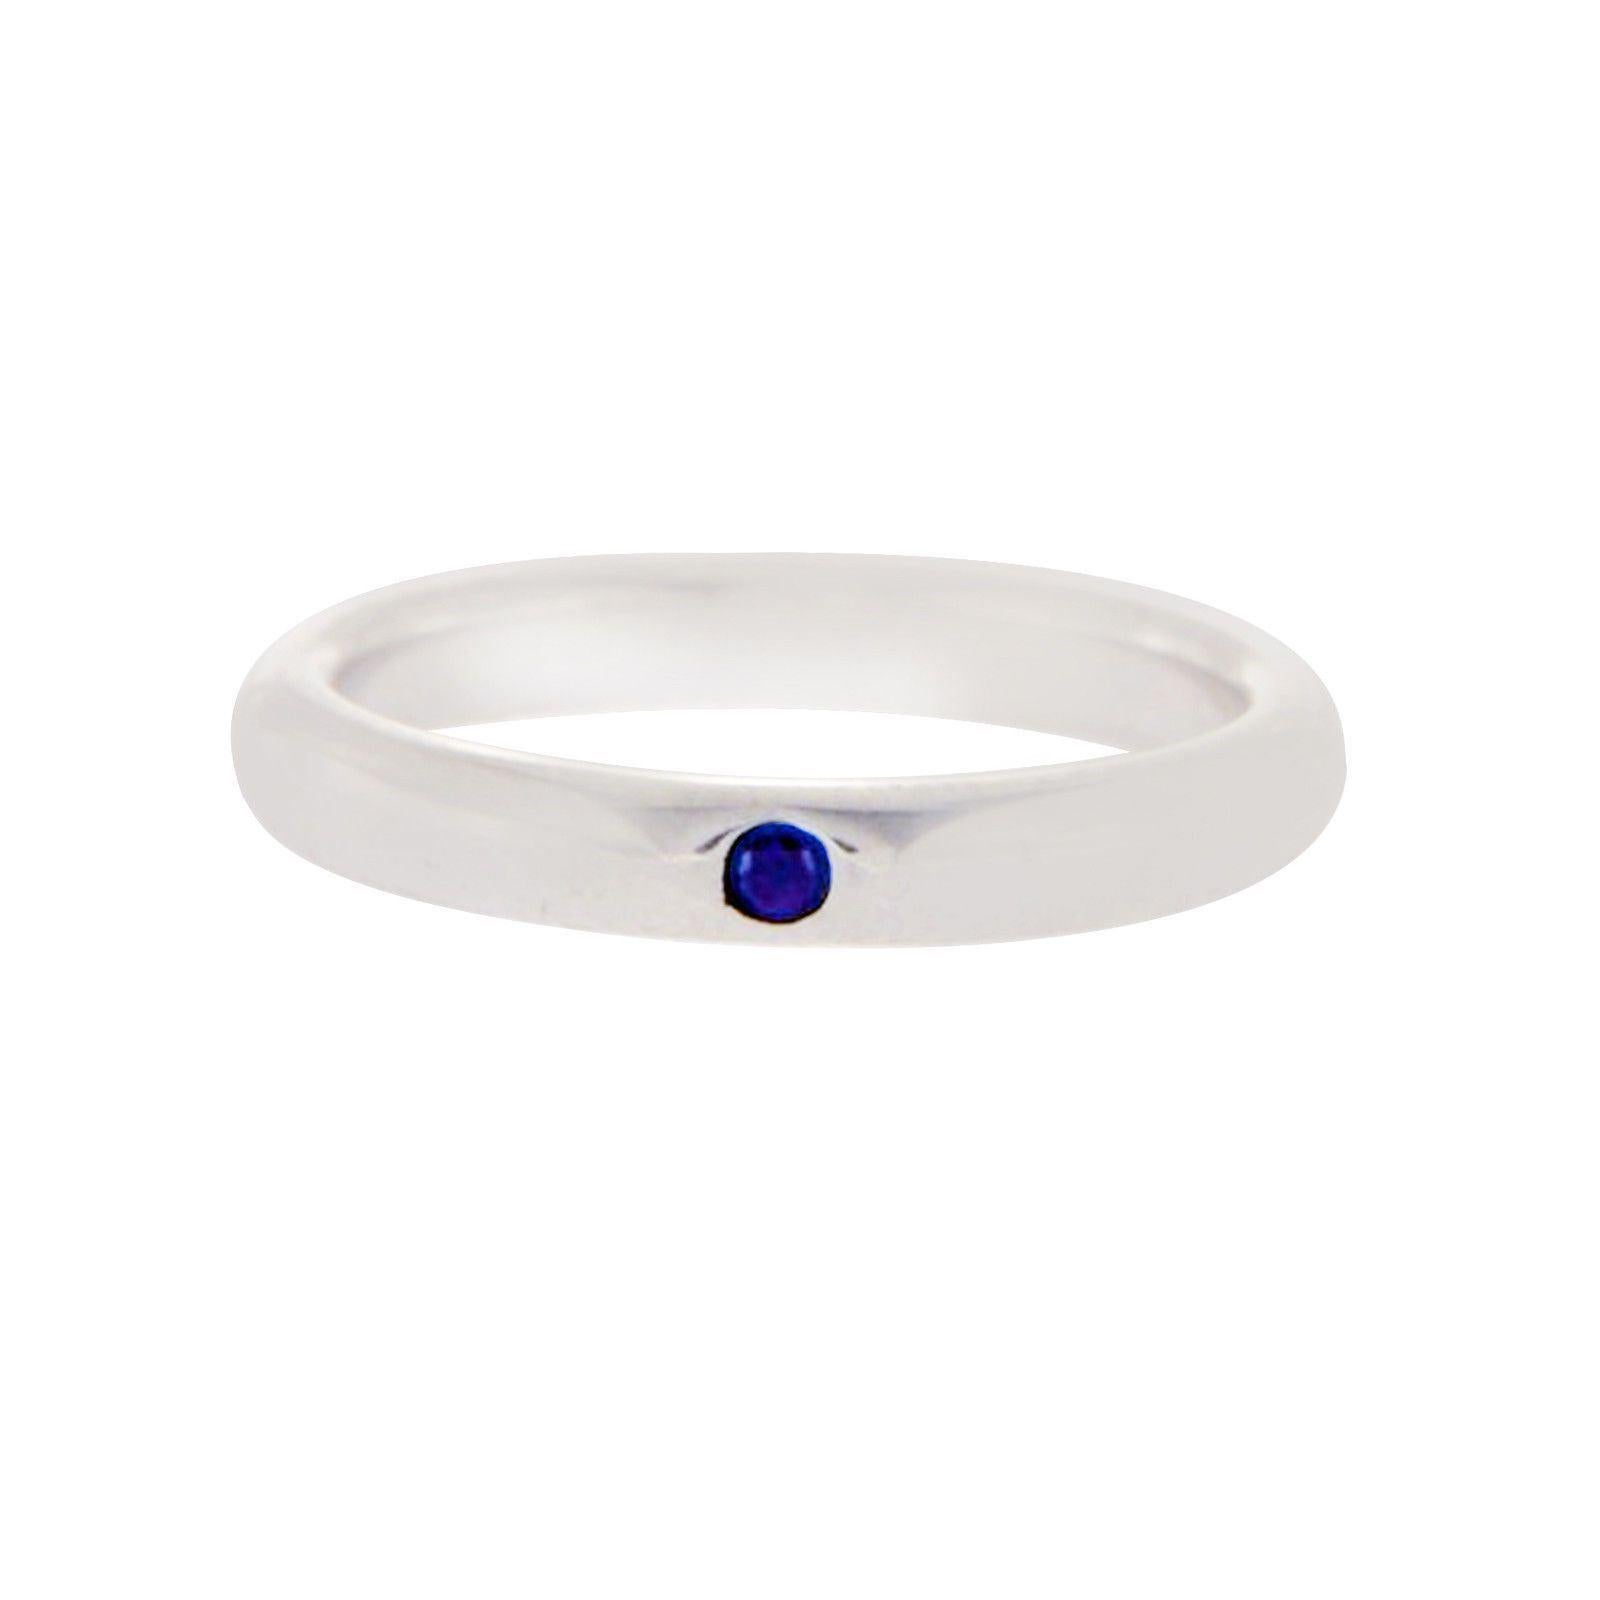 100% Authentic, 100% Customer Satisfaction, Free 30 Days Return 

Top: 2.7 mm

Band Width: 2.7 mm

Metal: 925 Sterling Silver

Size: 6.5

Hallmarks: Tiffany & Co 925 Peretti

Total Weight: 2.6 Grams

Stone Type: Blue Sapphire

Condition: Pre